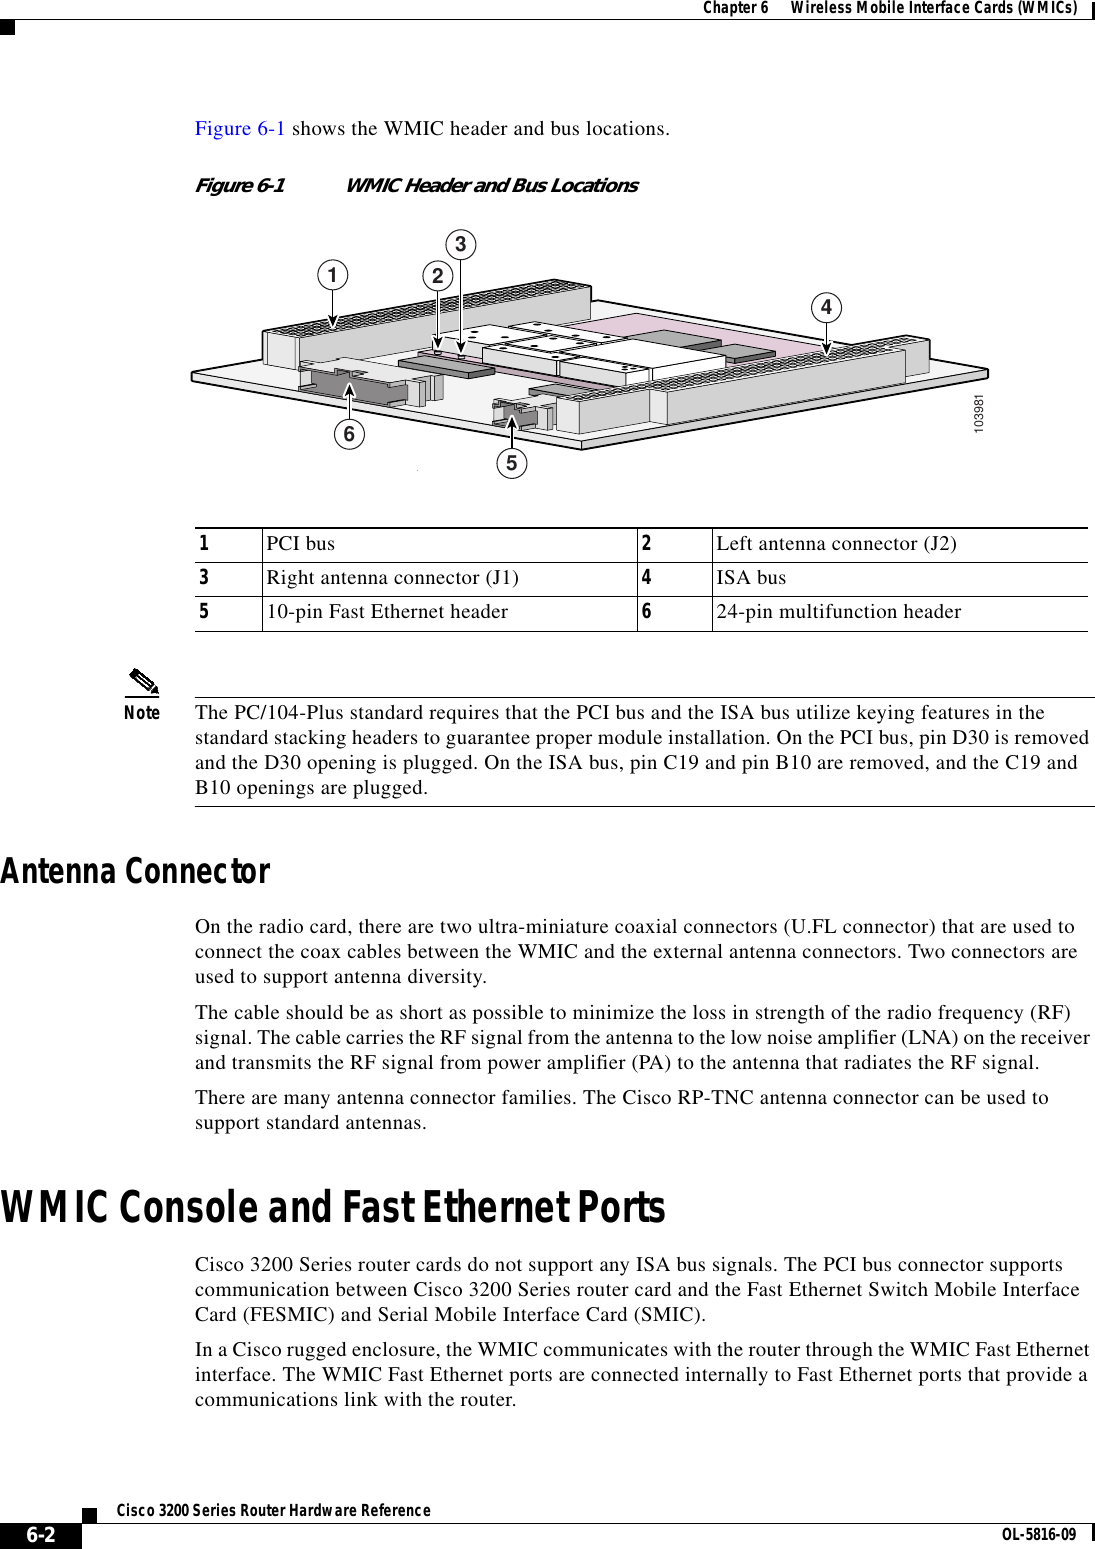 6-2Cisco 3200 Series Router Hardware Reference OL-5816-09Chapter 6      Wireless Mobile Interface Cards (WMICs)Figure 6-1 shows the WMIC header and bus locations.Figure 6-1 WMIC Header and Bus LocationsNote The PC/104-Plus standard requires that the PCI bus and the ISA bus utilize keying features in thestandard stacking headers to guarantee proper module installation. On the PCI bus, pin D30 is removedand the D30 opening is plugged. On the ISA bus, pin C19 and pin B10 are removed, and the C19 andB10 openings are plugged.Antenna ConnectorOn the radio card, there are two ultra-miniature coaxial connectors (U.FL connector) that are used toconnect the coax cables between the WMIC and the external antenna connectors. Two connectors areused to support antenna diversity.The cable should be as short as possible to minimize the loss in strength of the radio frequency (RF)signal. The cable carries the RF signal from the antenna to the low noise amplifier (LNA) on the receiverand transmits the RF signal from power amplifier (PA) to the antenna that radiates the RF signal.There are many antenna connector families. The Cisco RP-TNC antenna connector can be used tosupport standard antennas.WMIC Console and Fast Ethernet PortsCisco 3200 Series router cards do not support any ISA bus signals. The PCI bus connector supportscommunication between Cisco 3200 Series router card and the Fast Ethernet Switch Mobile InterfaceCard (FESMIC) and Serial Mobile Interface Card (SMIC).In a Cisco rugged enclosure, the WMIC communicates with the router through the WMIC Fast Ethernetinterface. The WMIC Fast Ethernet ports are connected internally to Fast Ethernet ports that provide acommunications link with the router.1PCI bus 2Left antenna connector (J2)3Right antenna connector (J1) 4ISA bus510-pin Fast Ethernet header 624-pin multifunction header103981421356